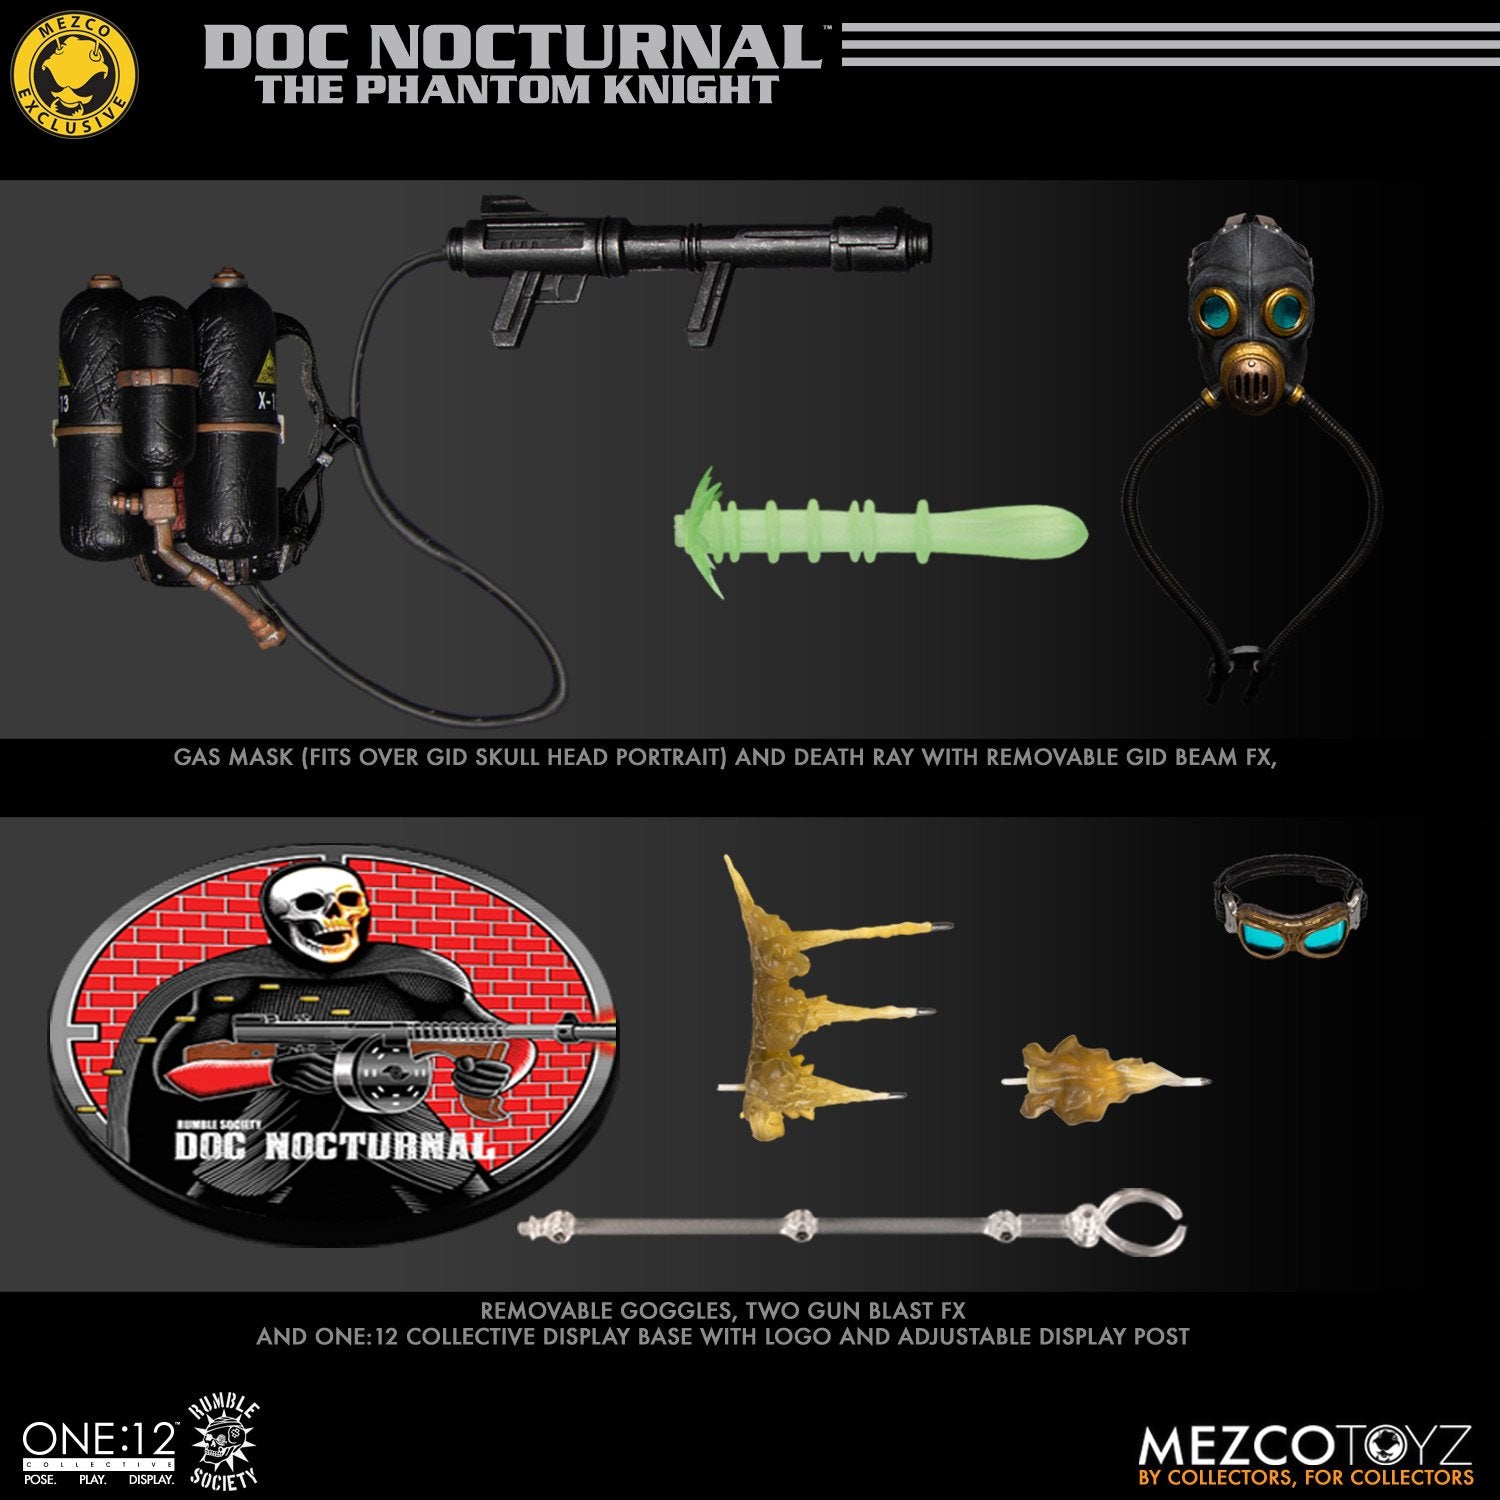 Mezco One:12 Rumble Society Doc Nocturnal The Phantom Knight additional accessories